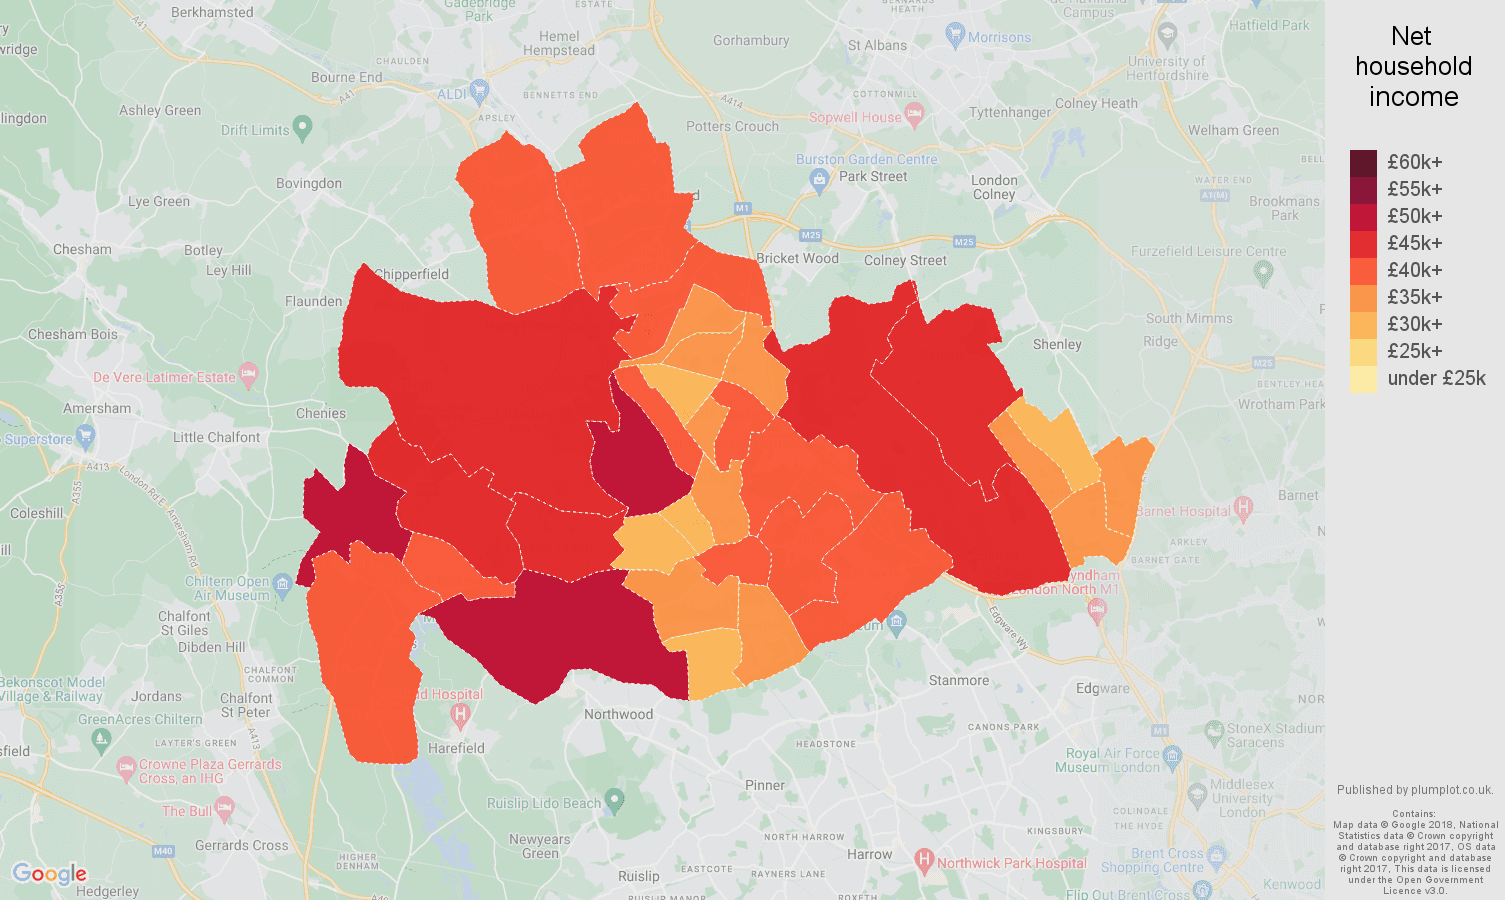 Watford net household income map